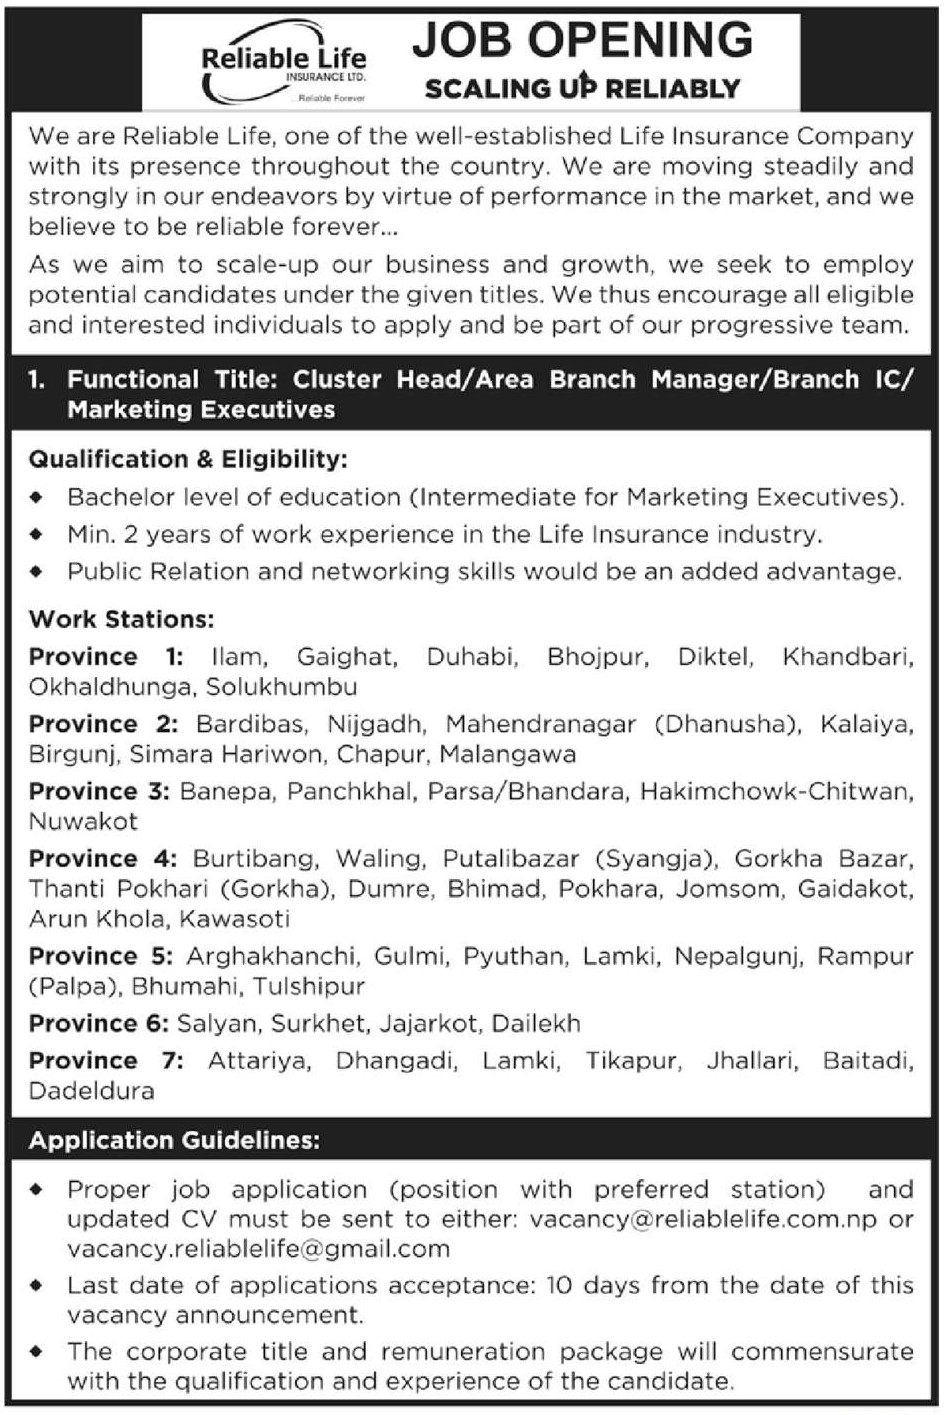 Functional Title: Cluster Head/Area Branch Manager/Branch IC/ Marketing Executives